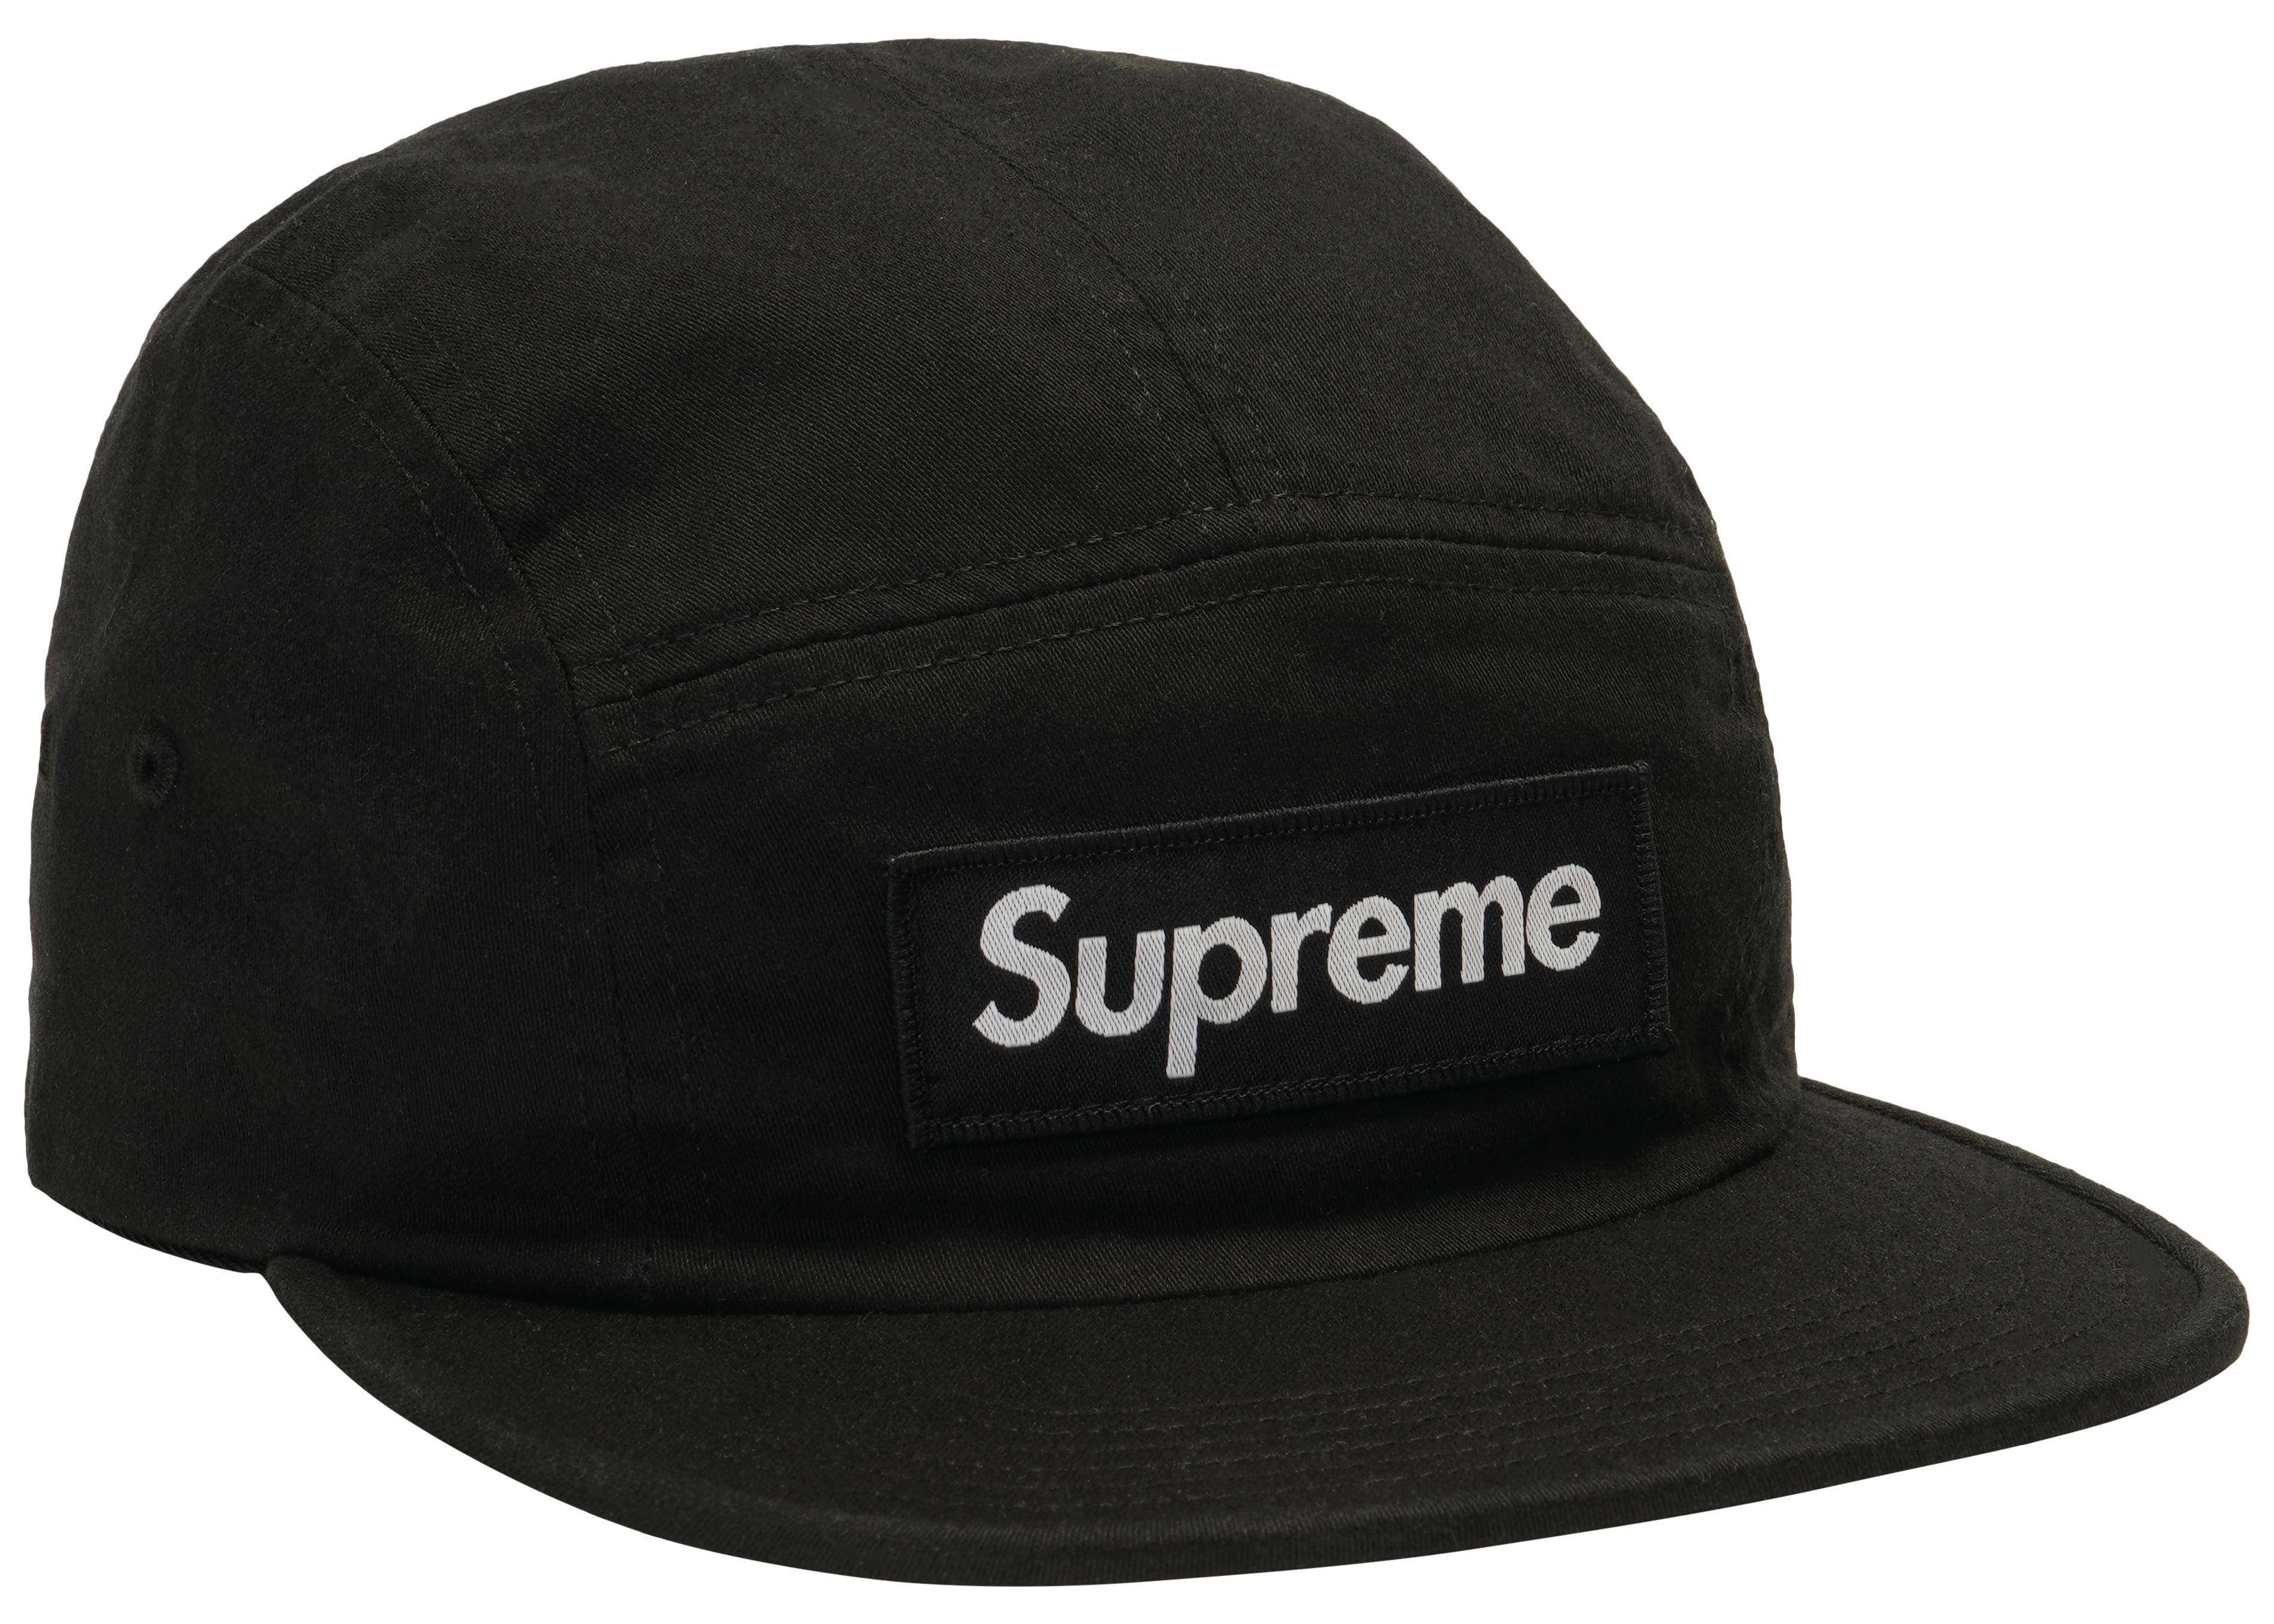 Supreme Washed Chino Twill Camp Cap (fw18) Black in Black for Men - Lyst